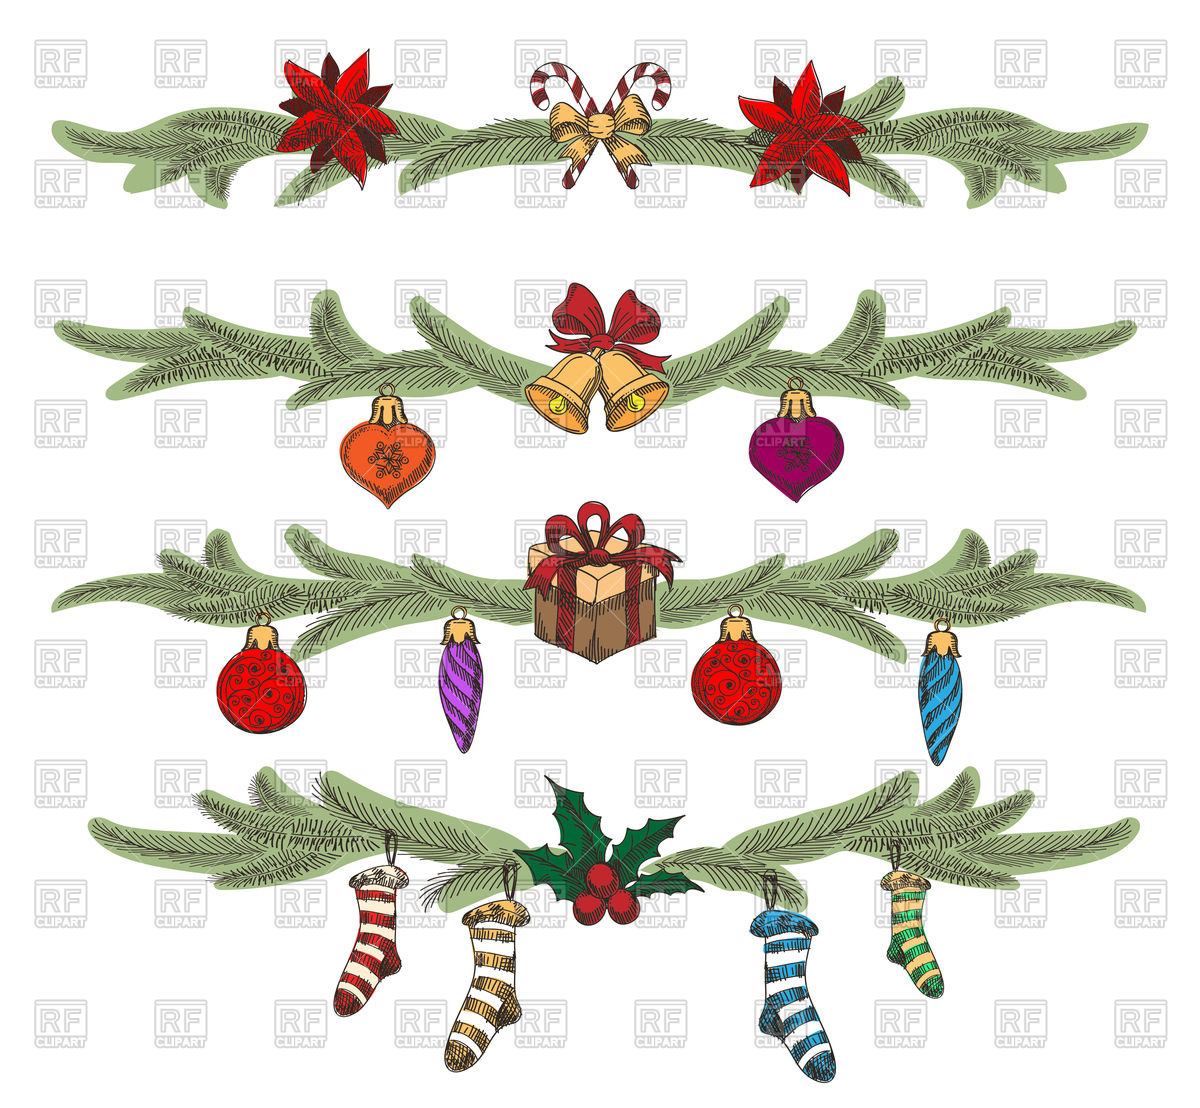     Christmas Stocking 95927 Download Royalty Free Vector Clipart  Eps